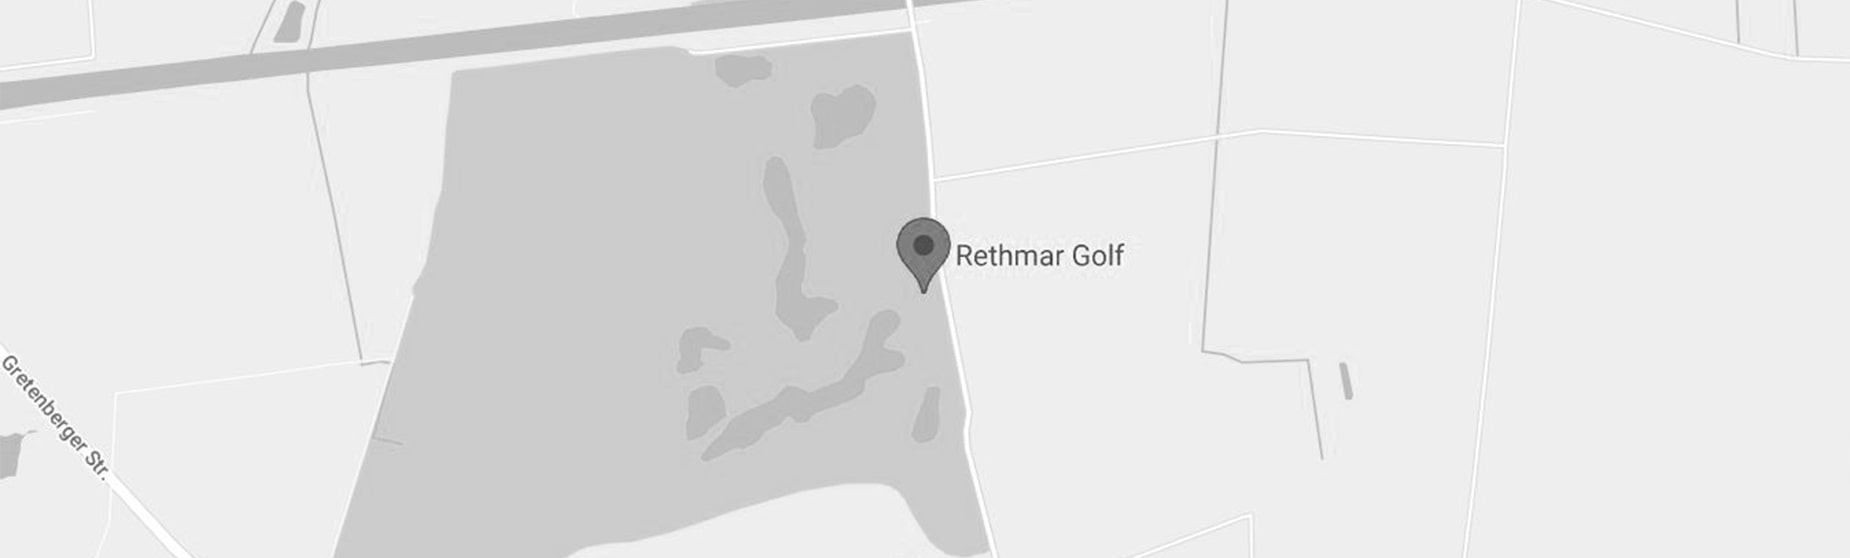 Directions to Rethmar